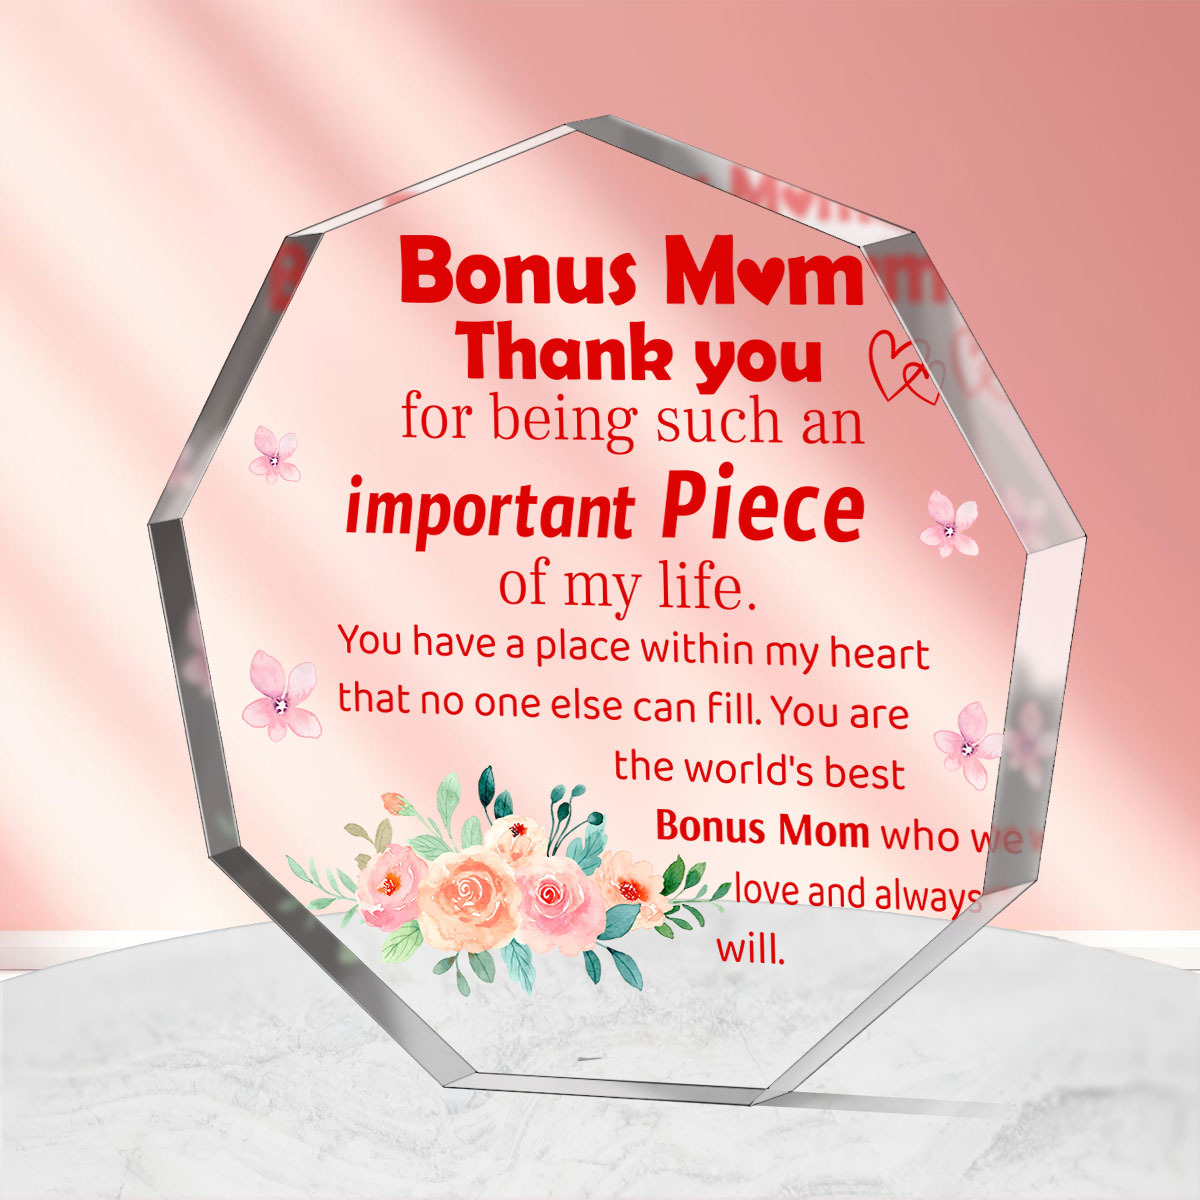 Best Mom Gifts Christmas Gifts for Mom from Daughter Son Kids, Gift Basket  for Mom Women Birthday Gifts for Mom Mother-in-law Thanksgiving Presents